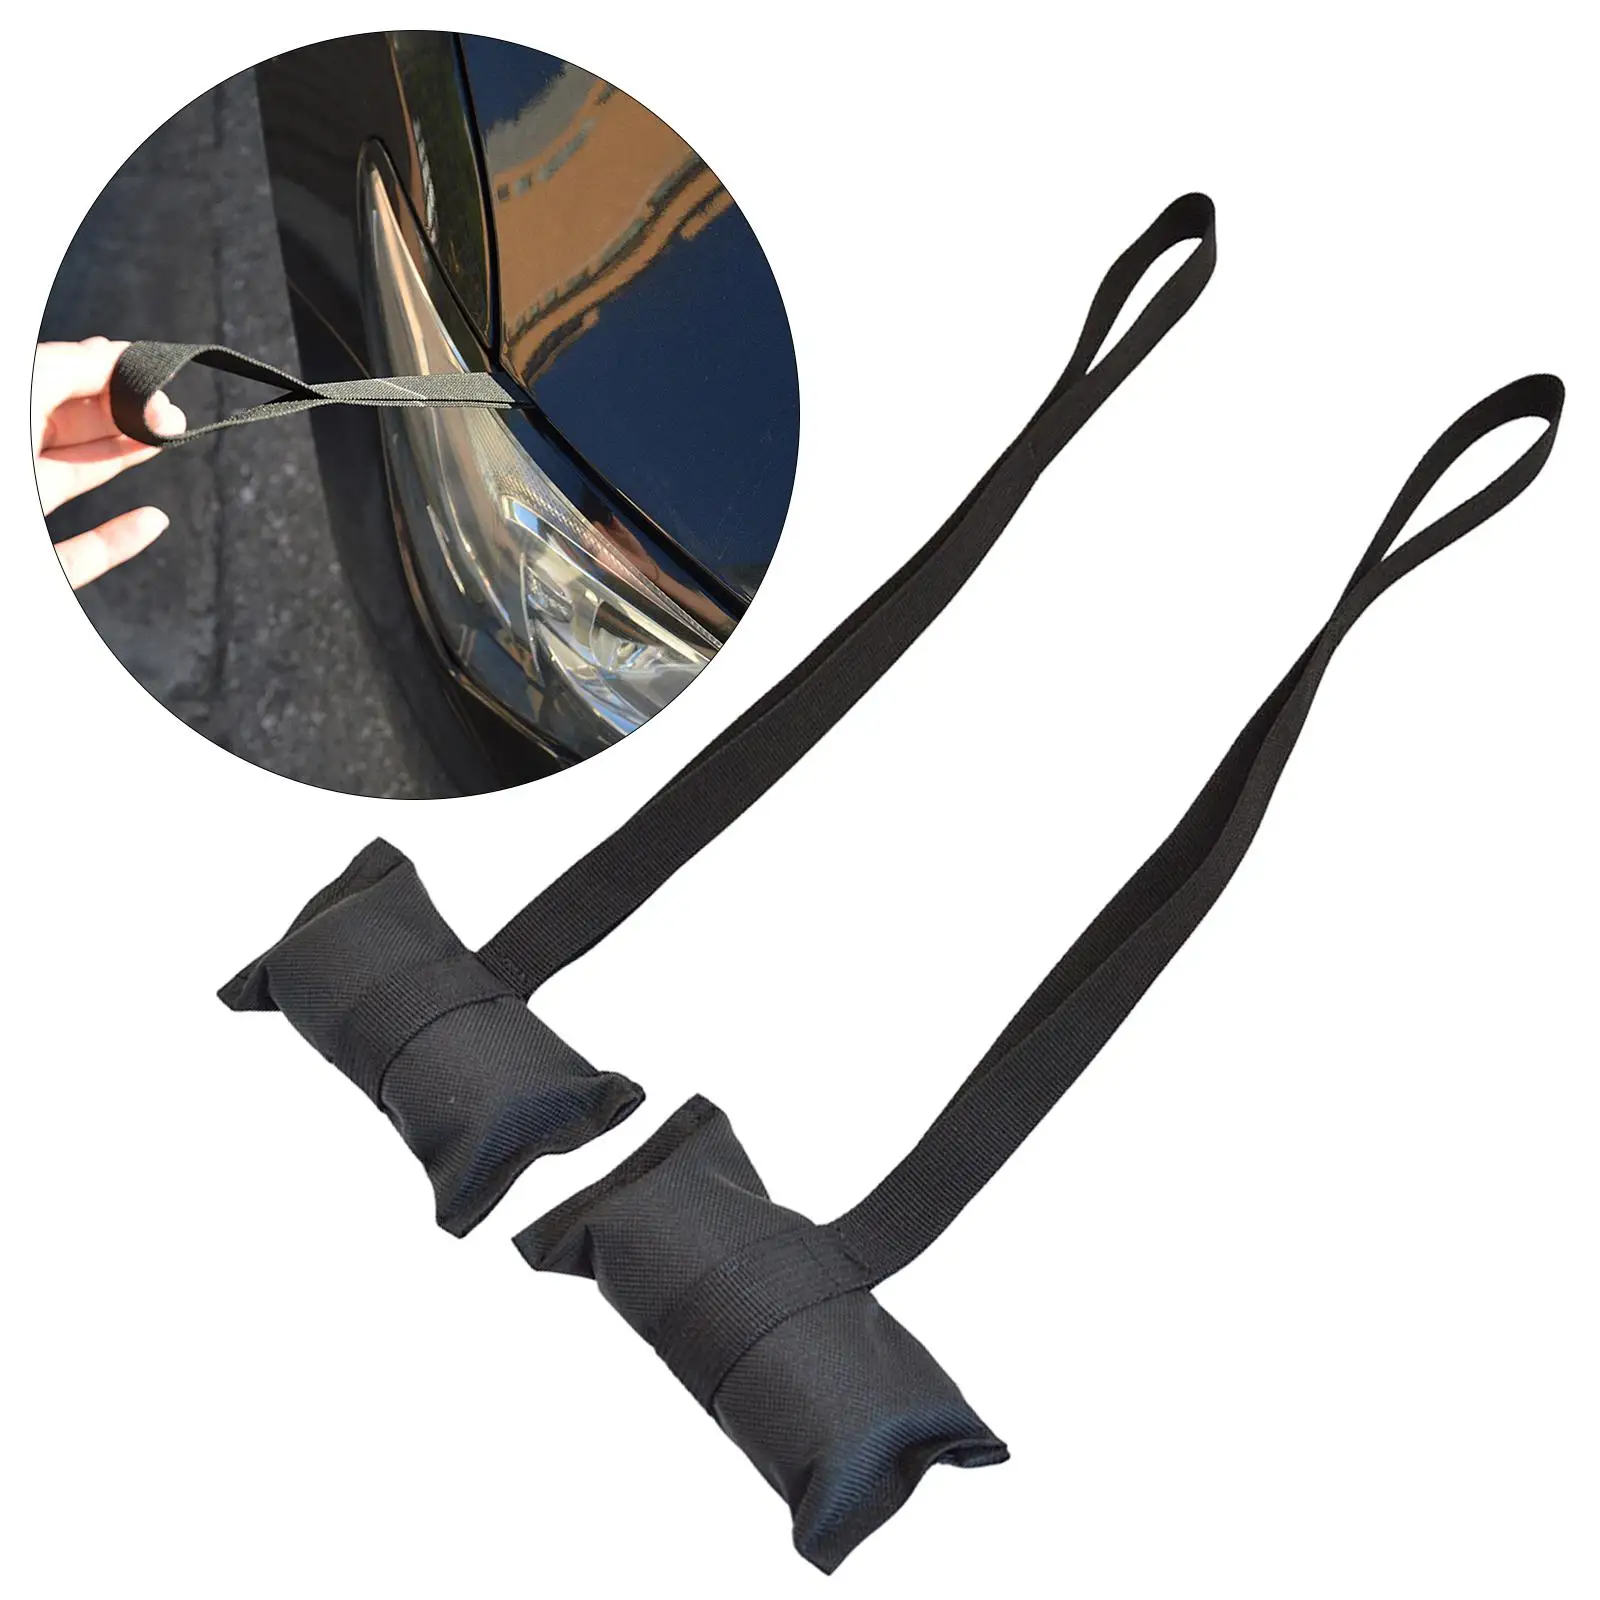 Canoe Anchors Tie Down Kayak Handles Disassembly Easy Installation